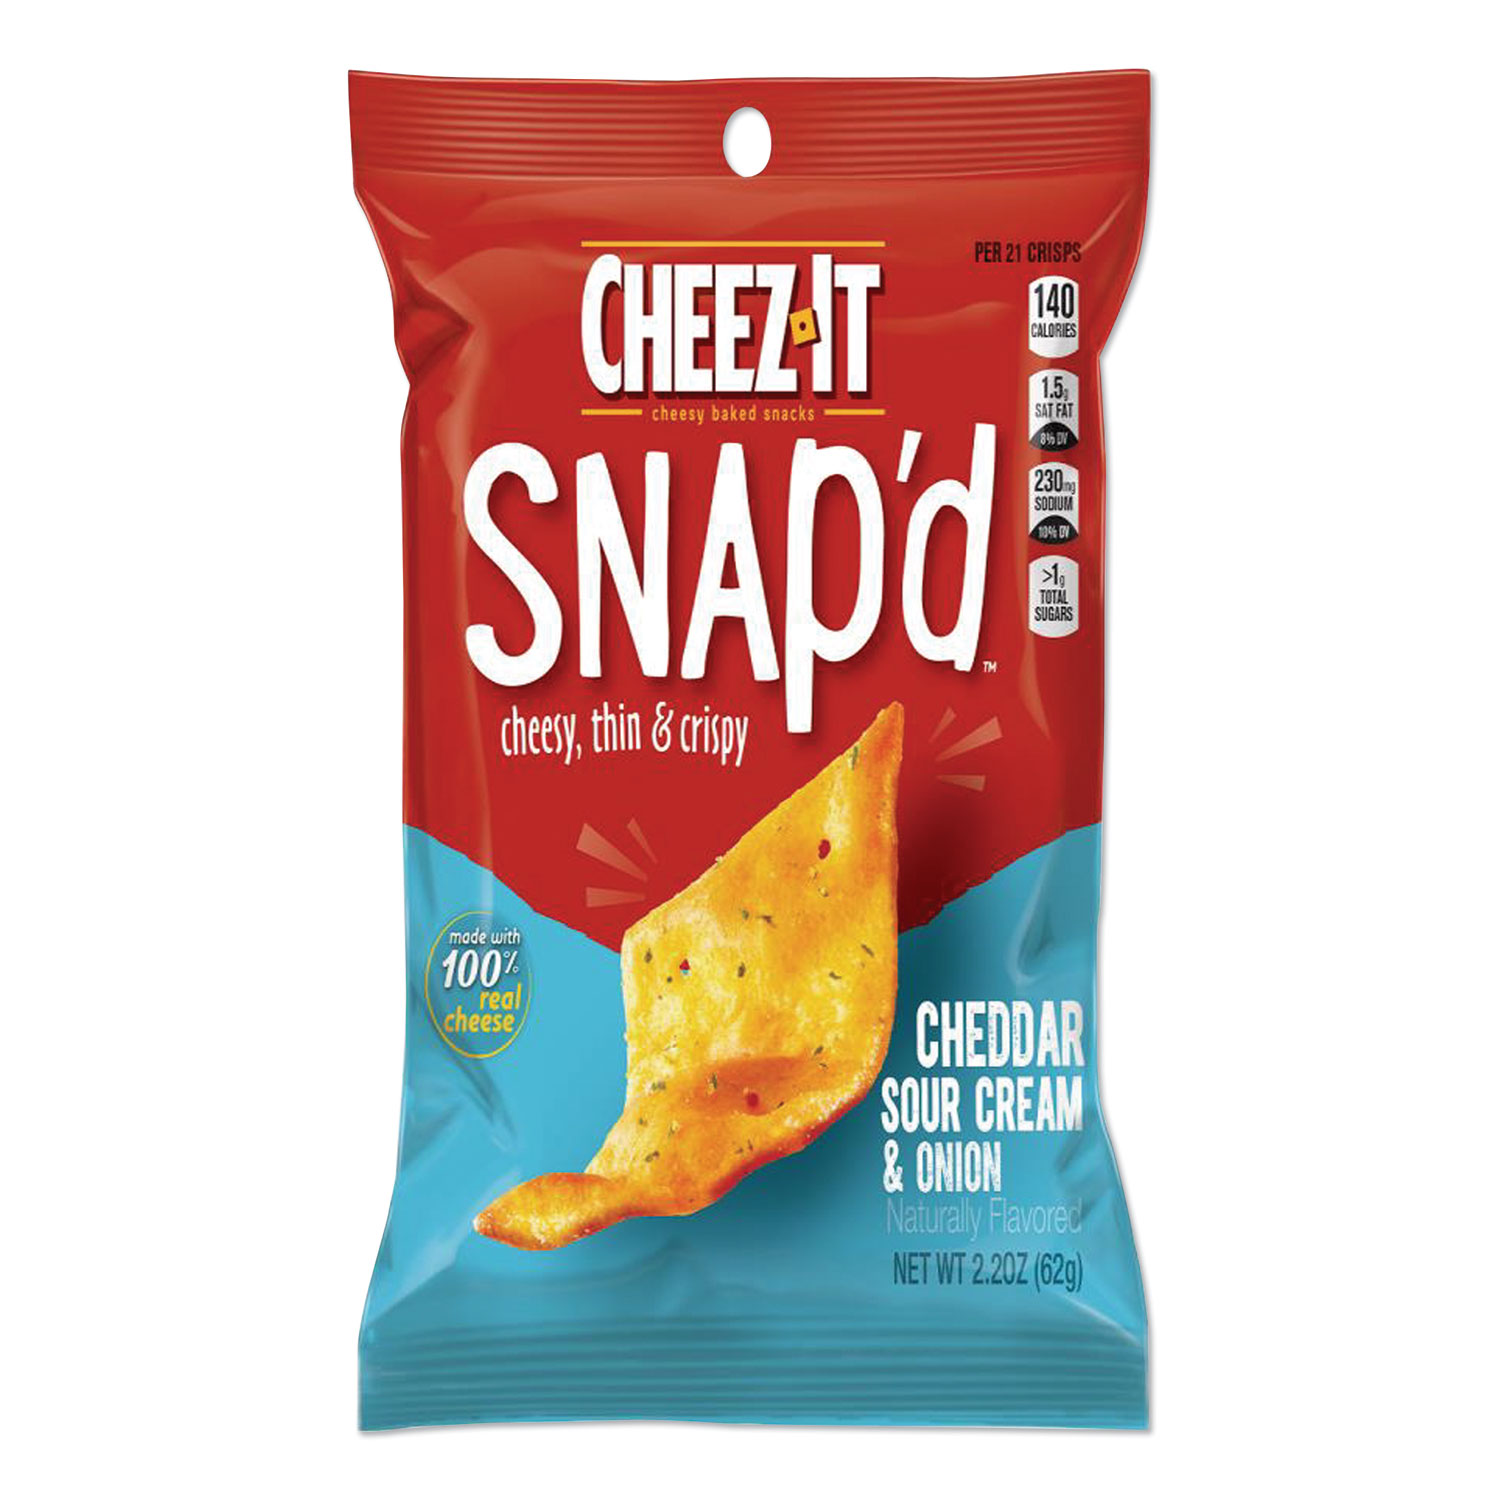 Sunshine® Cheez-it Snapd Crackers, Cheddar Sour Cream and Onion, 2.2 oz Pouch, 6/Pack